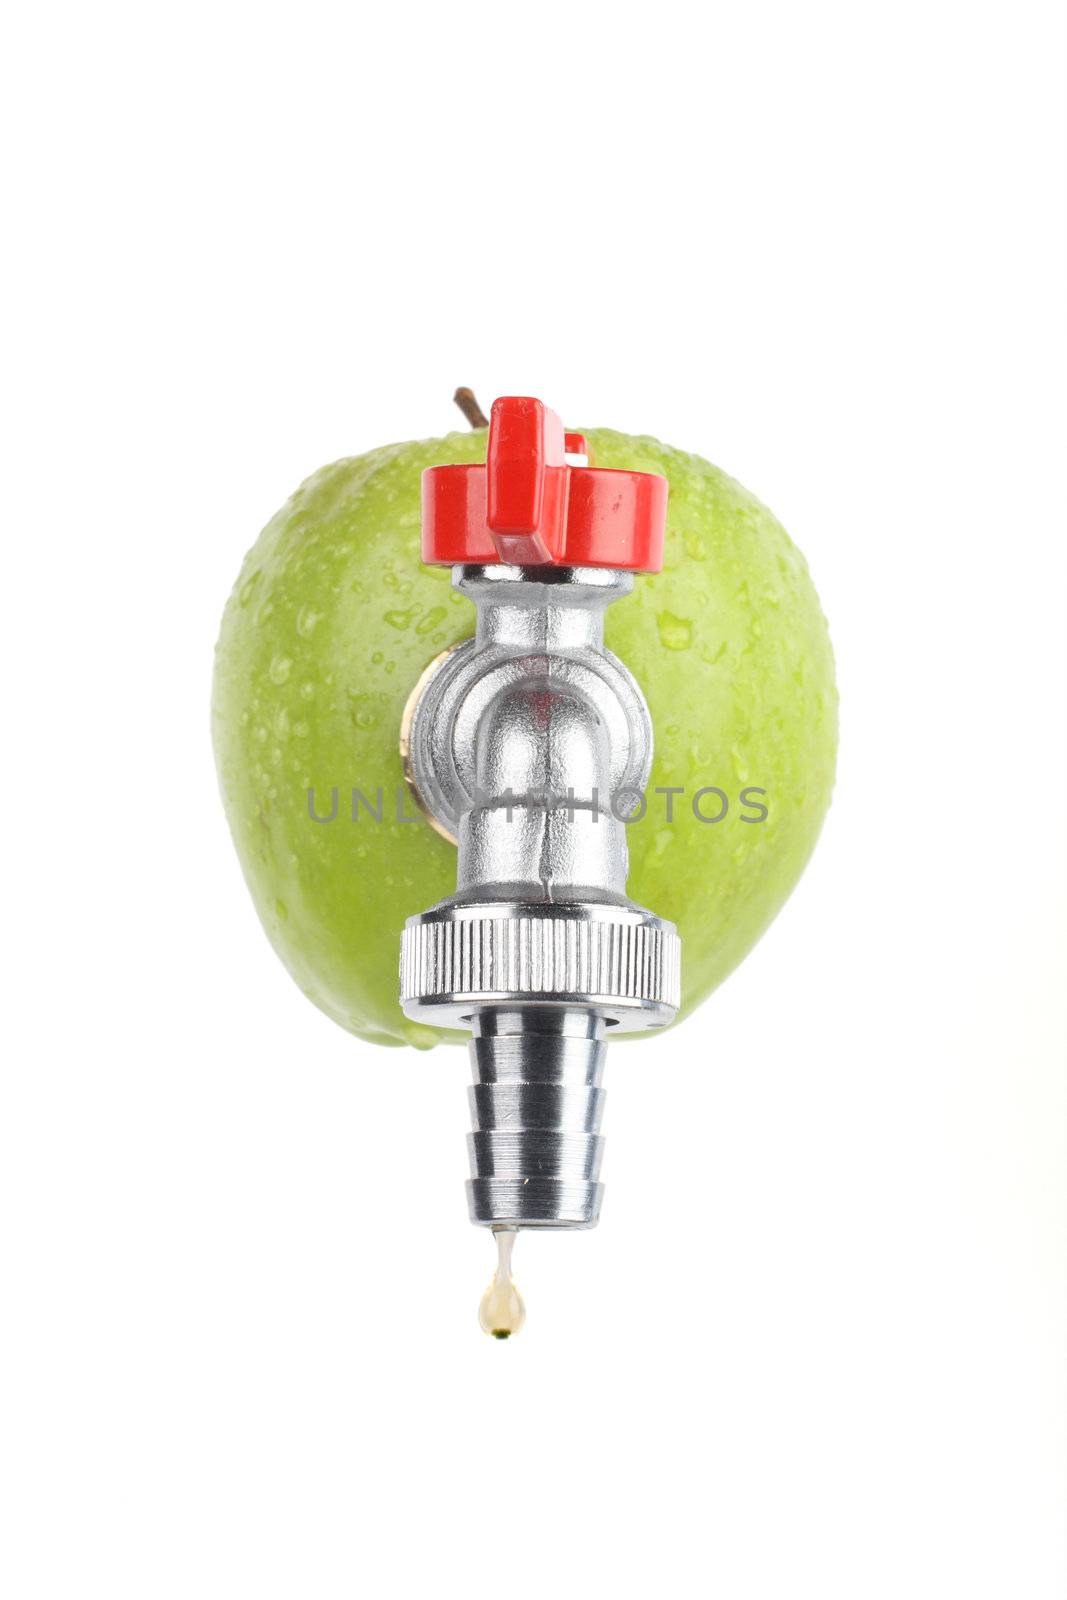 green apple with faucet, drop of apple juice dripping from it, isolated on white